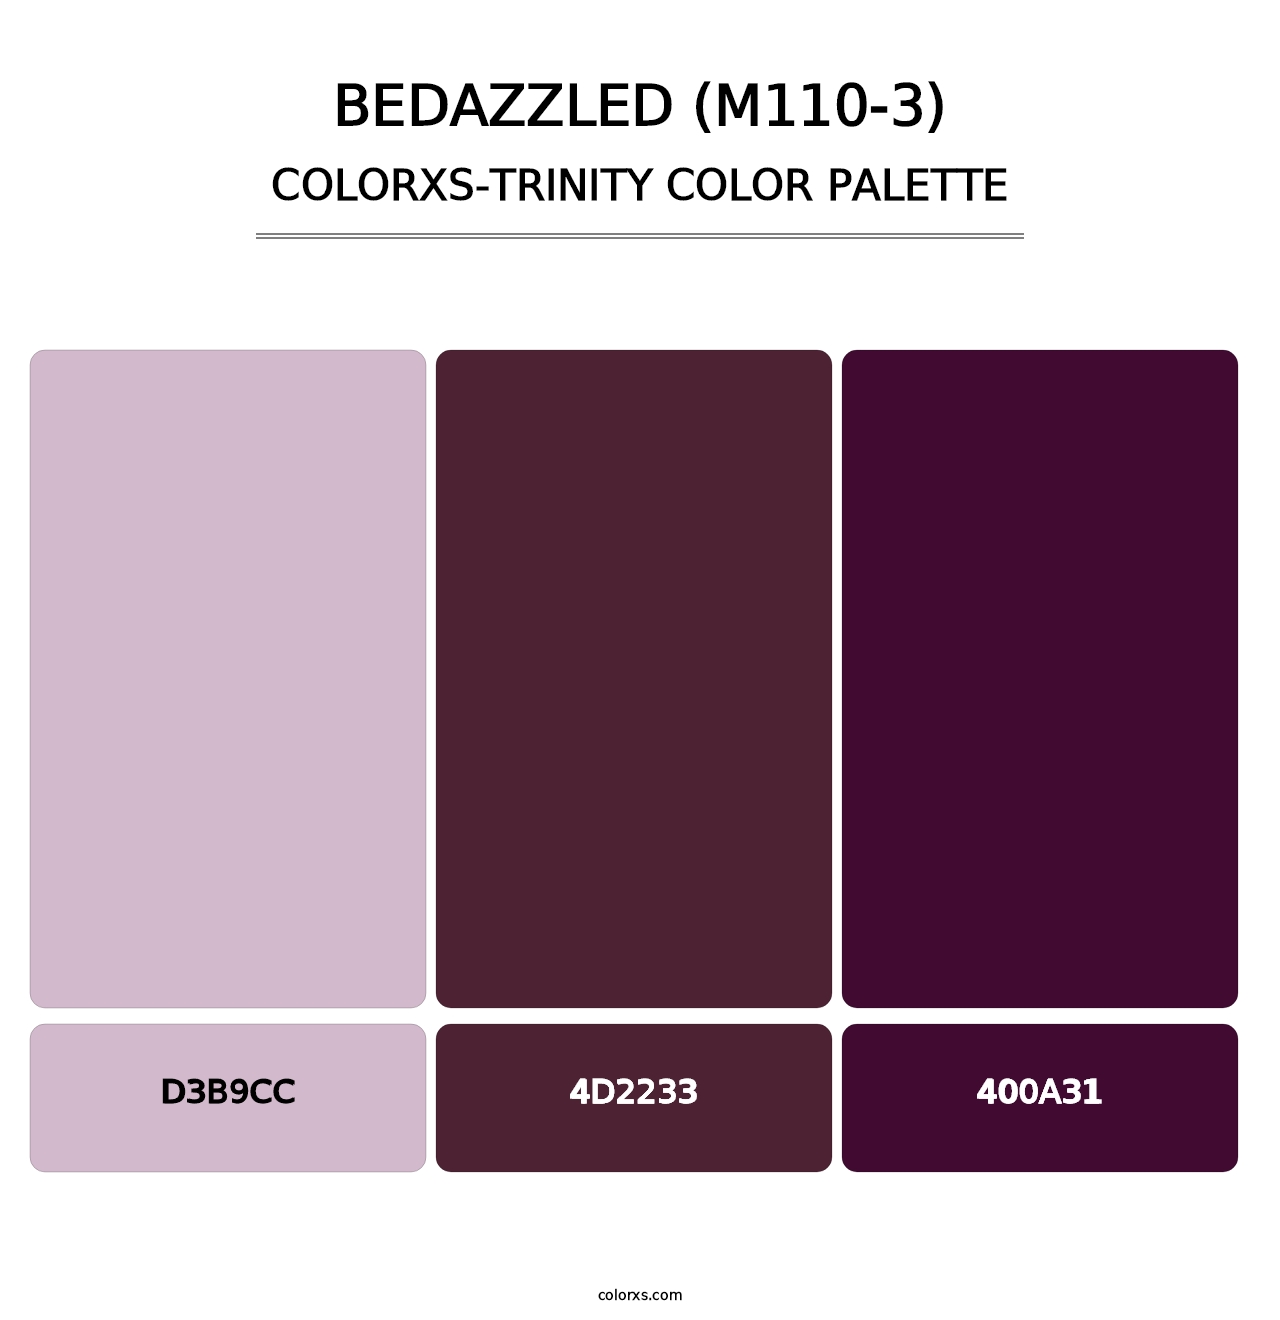 Bedazzled (M110-3) - Colorxs Trinity Palette